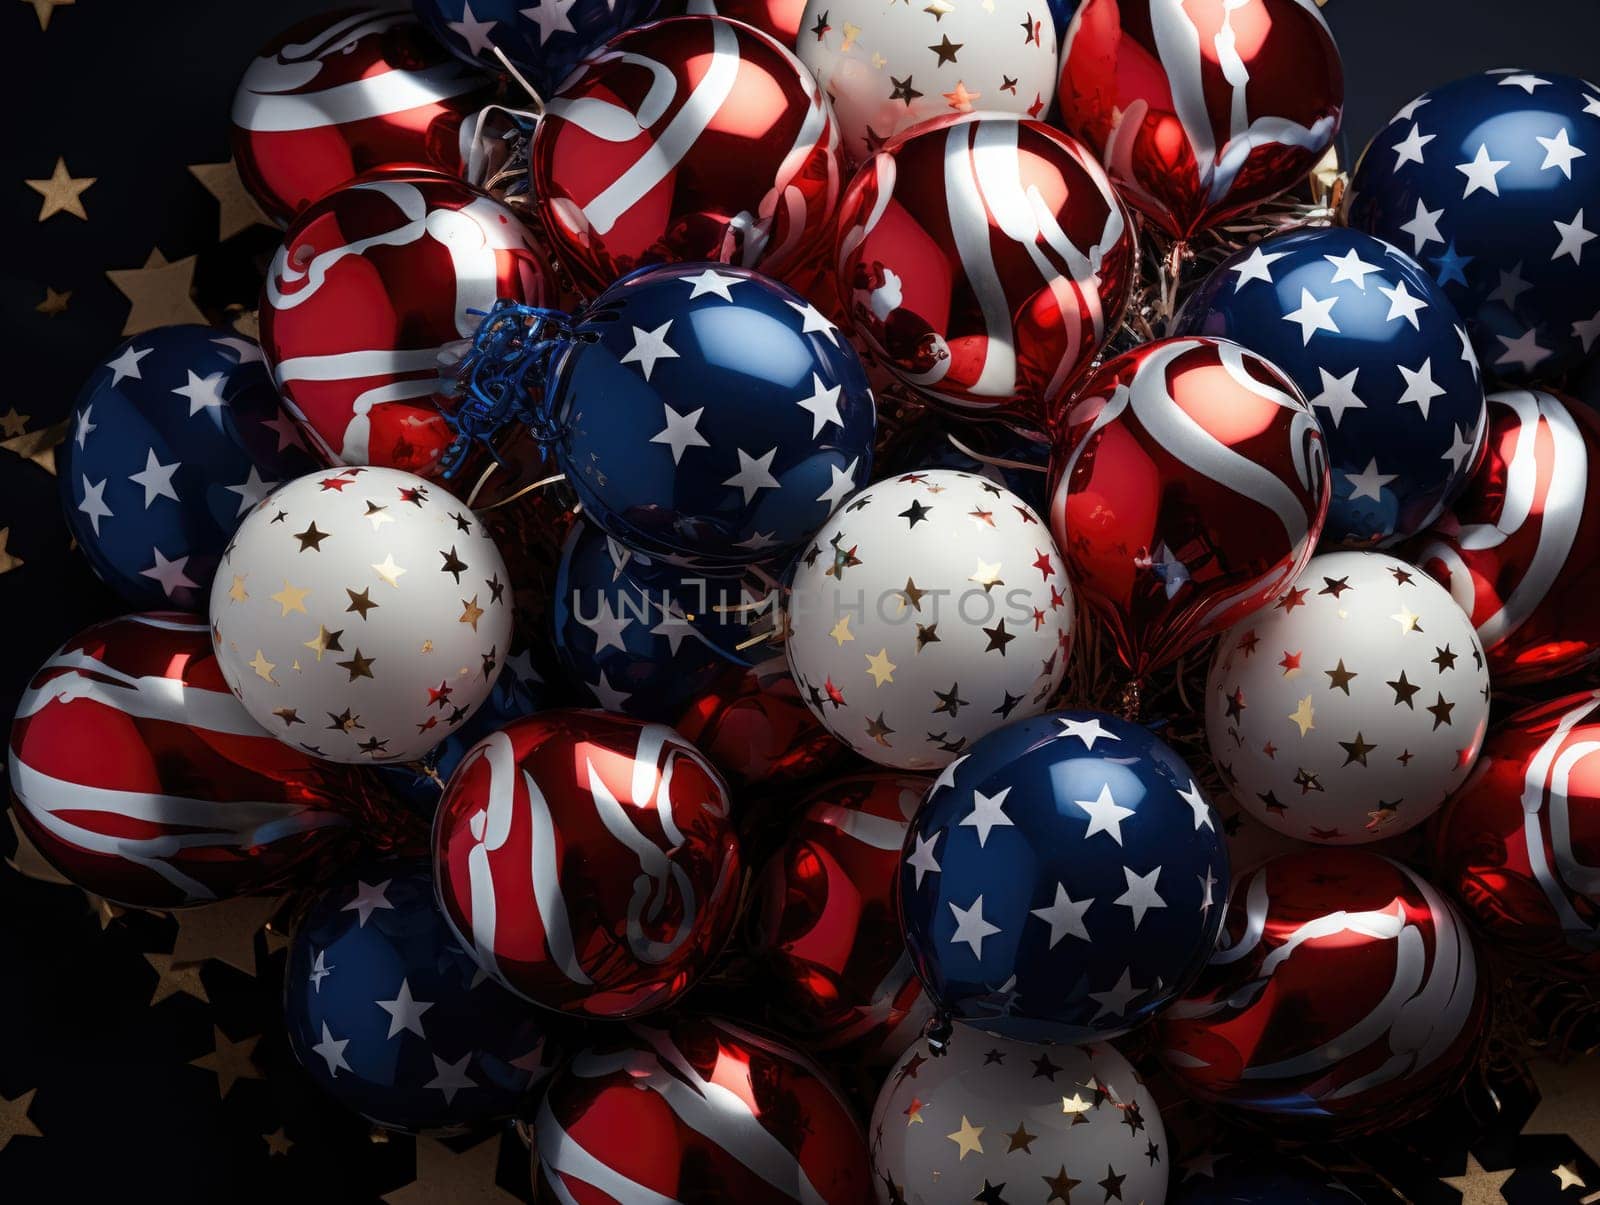 A grouping of red, white, and blue ornaments stacked on top of each other.